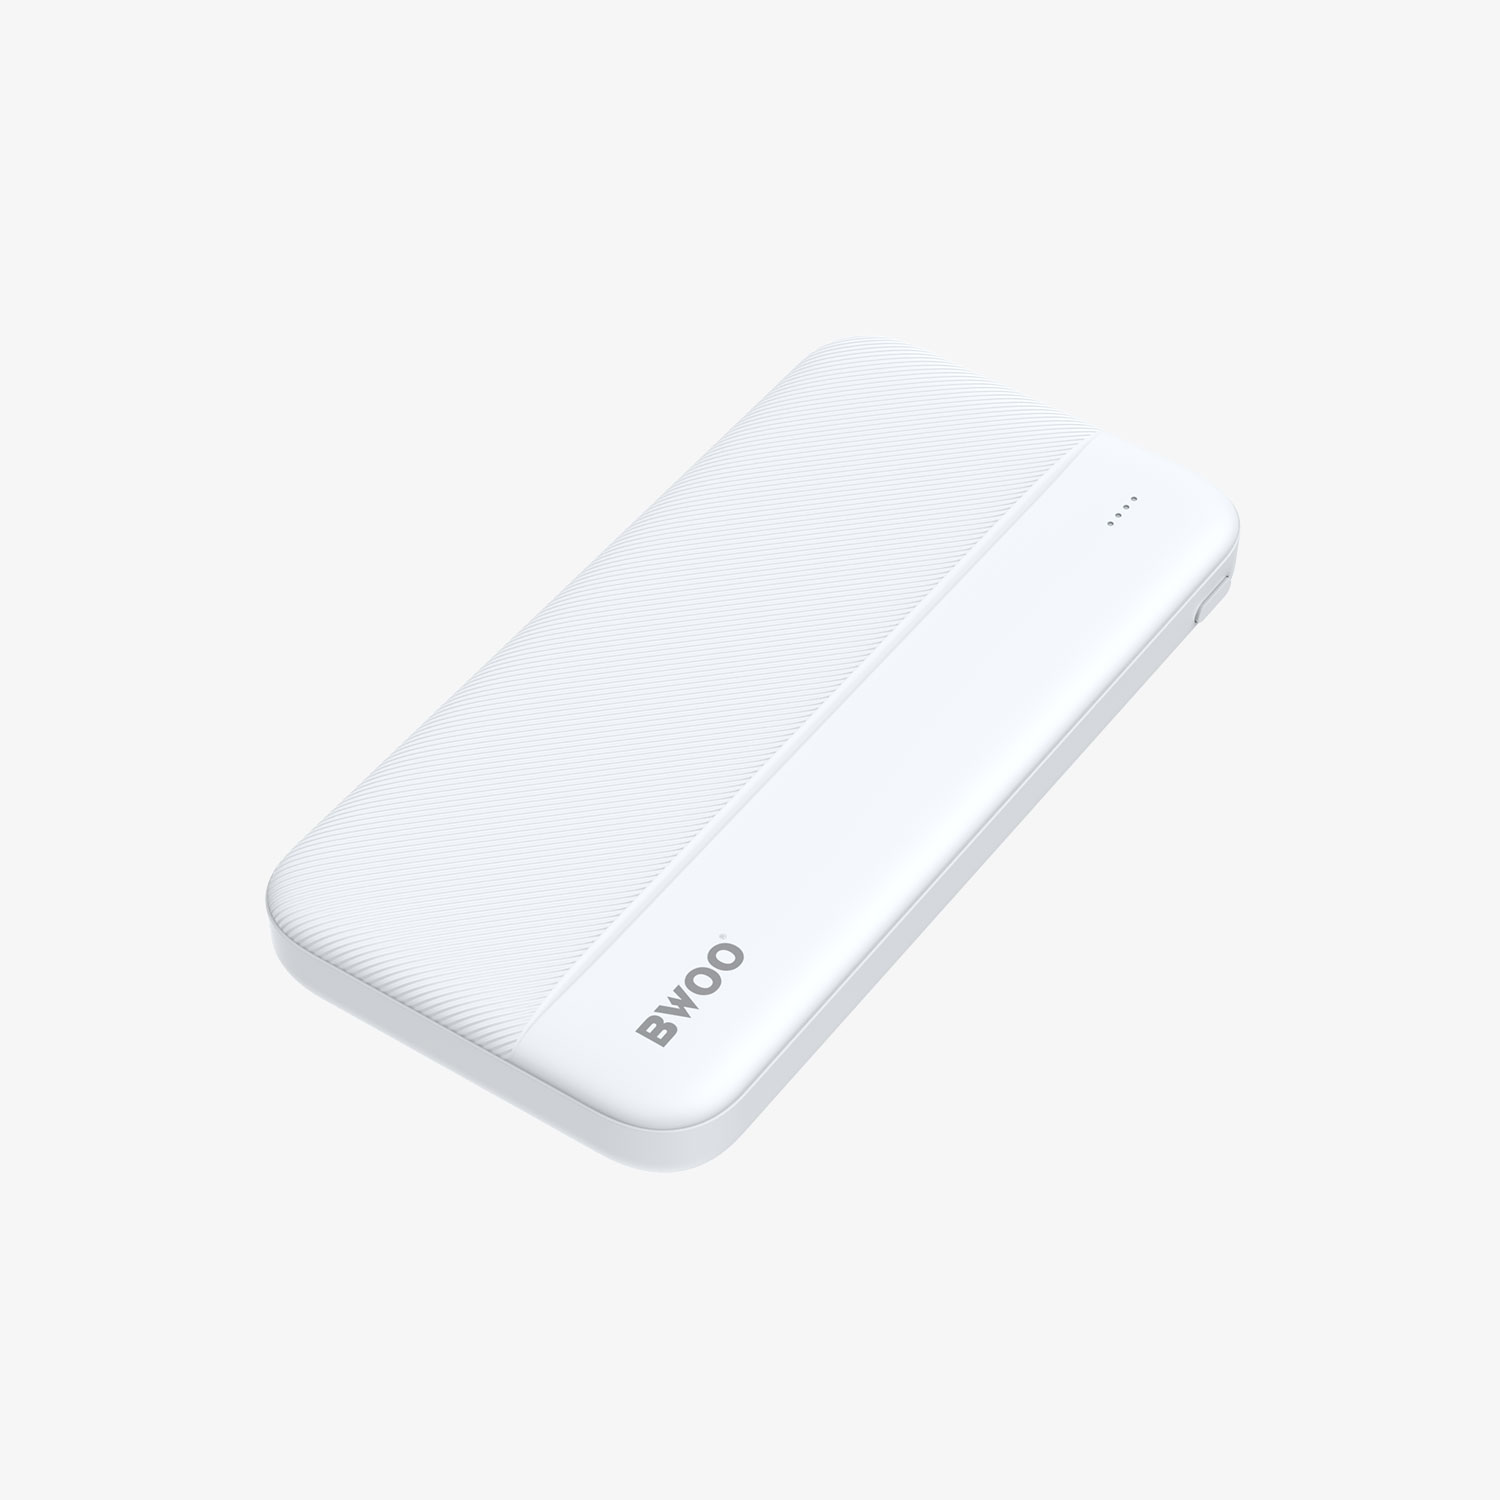 portable power bank charger